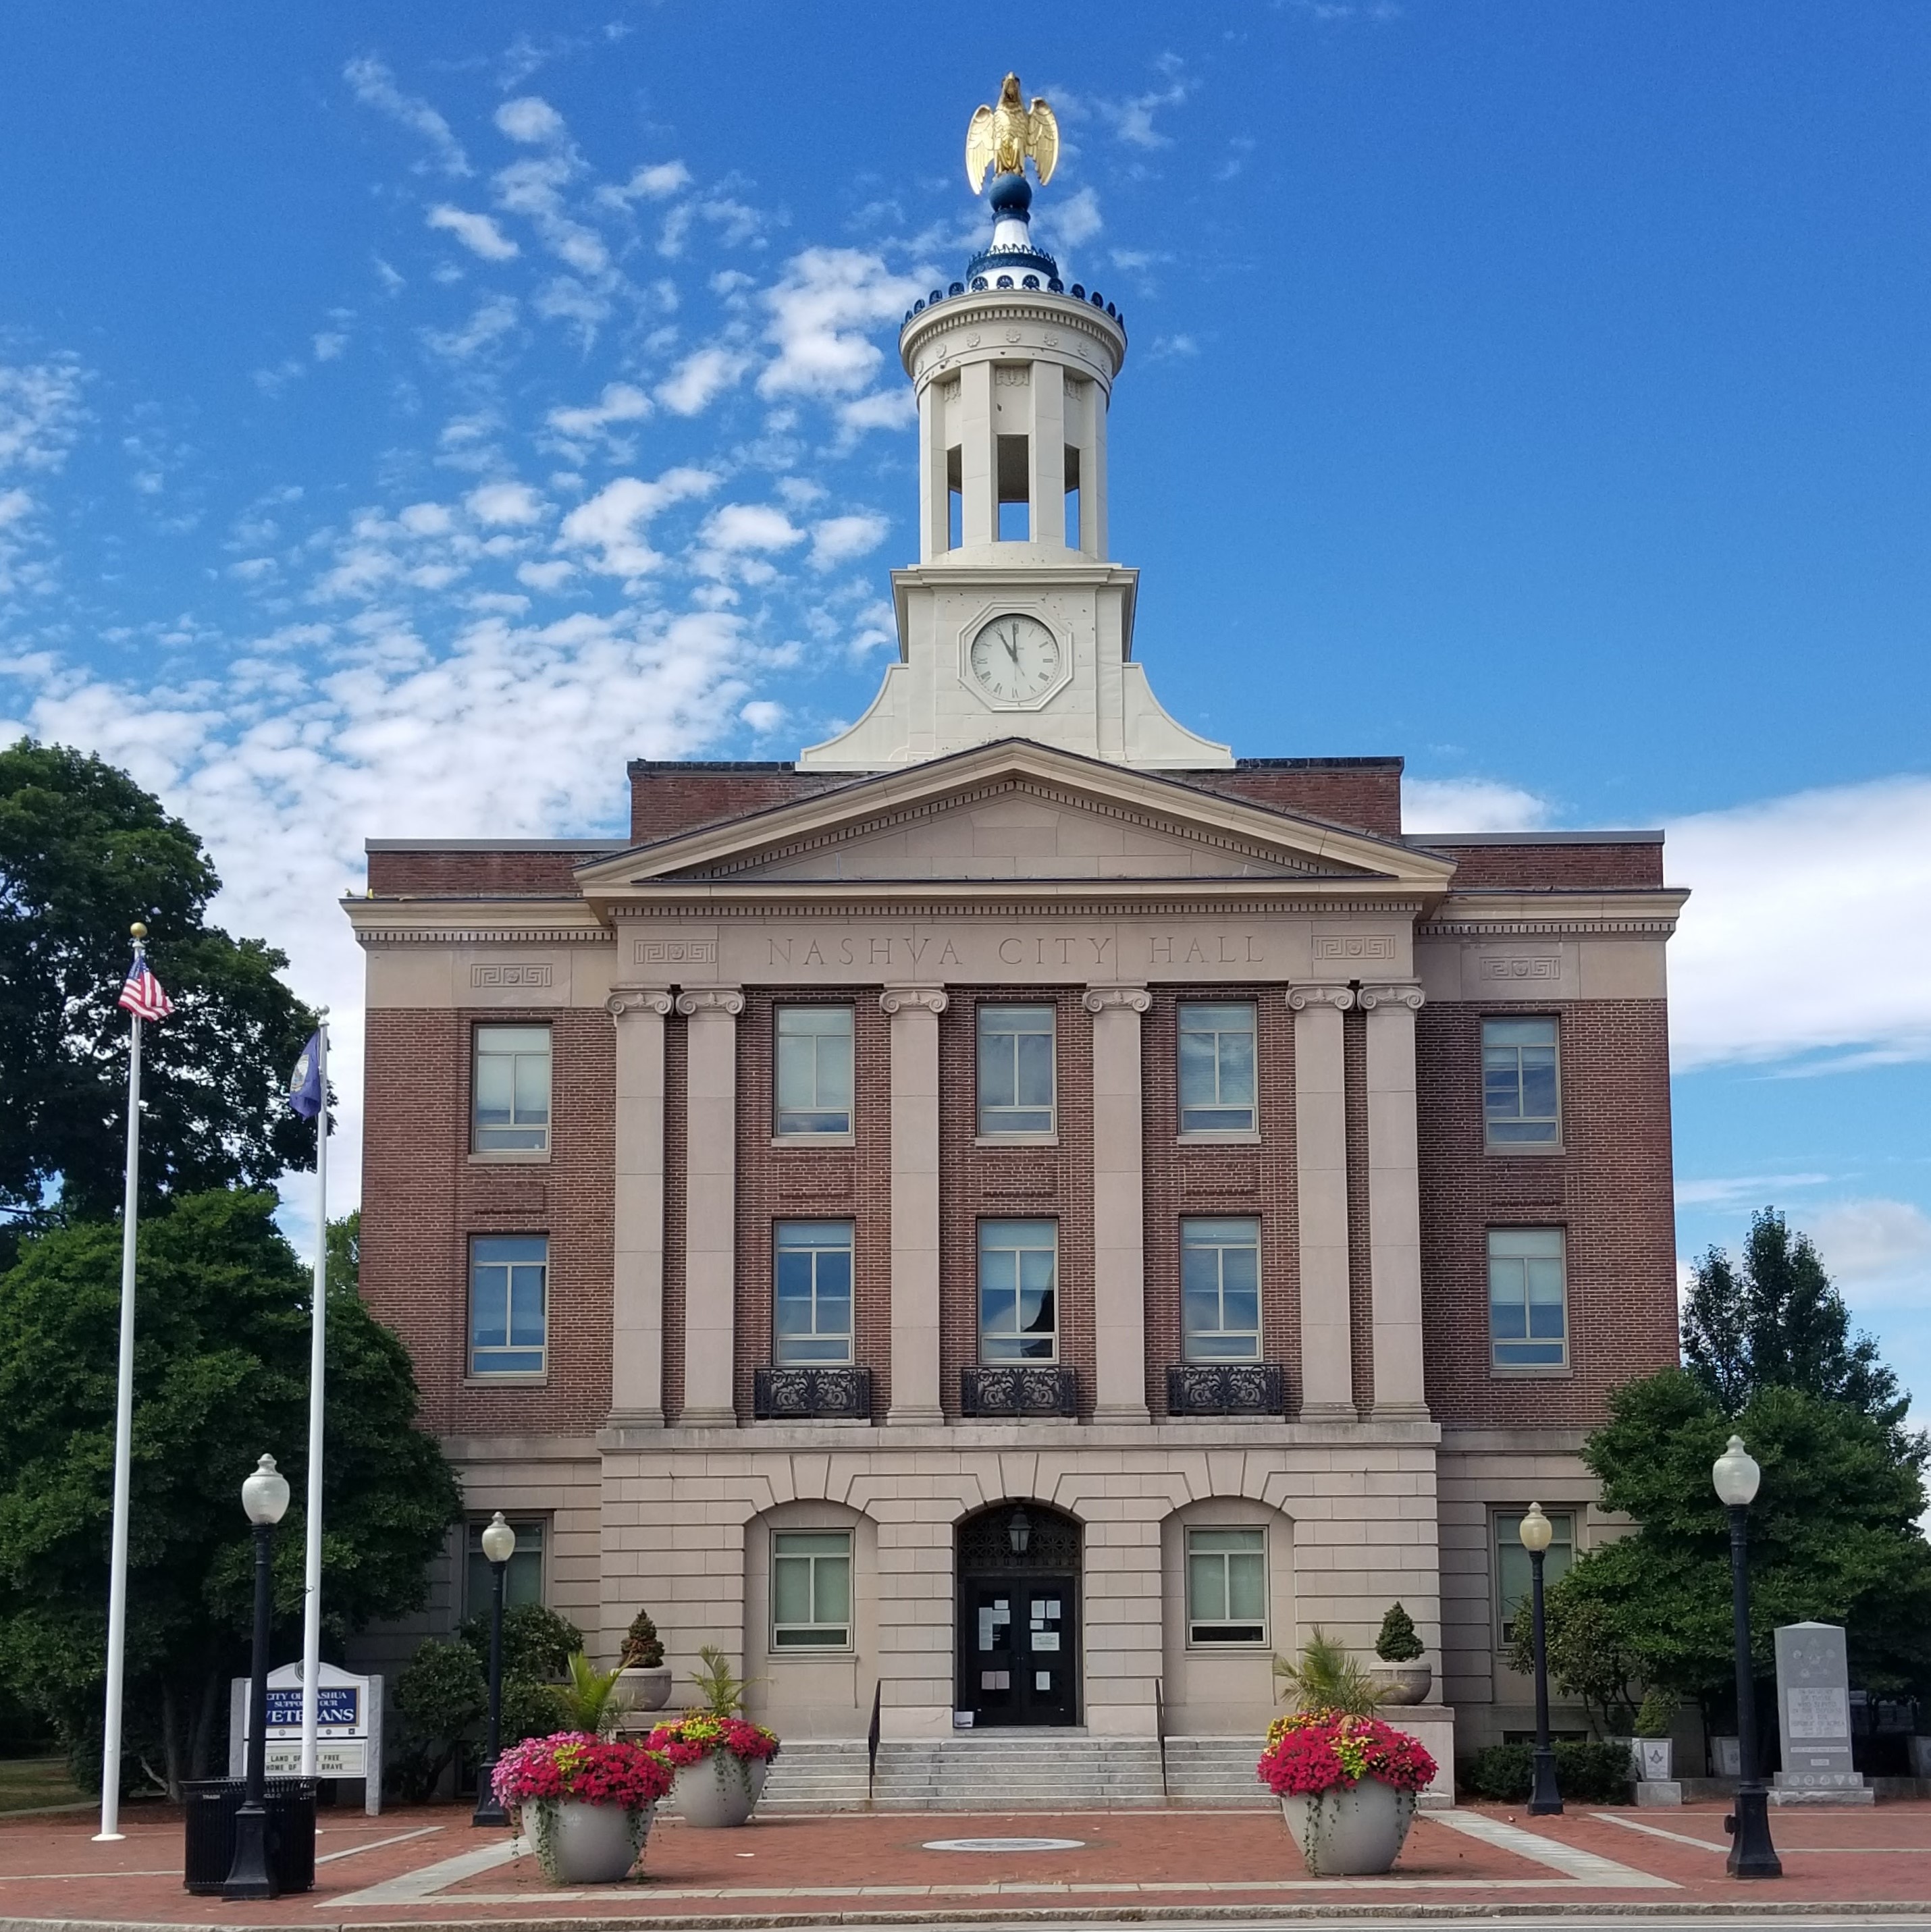 This is a photo of Nashua's city hall building. The photo is taken from the sidewalk, and the building is in the foreground of a mostly blue, slightly cloudy sky. The building is brick with beige cement bricks and columns accentuating the center of the building. At the top is a large clock, column accents, a dome, and a golden eagle. To the left is the American and New Hampshire state flags. New Hampshire personal injury lawyer Attorney Buckley features this photo.